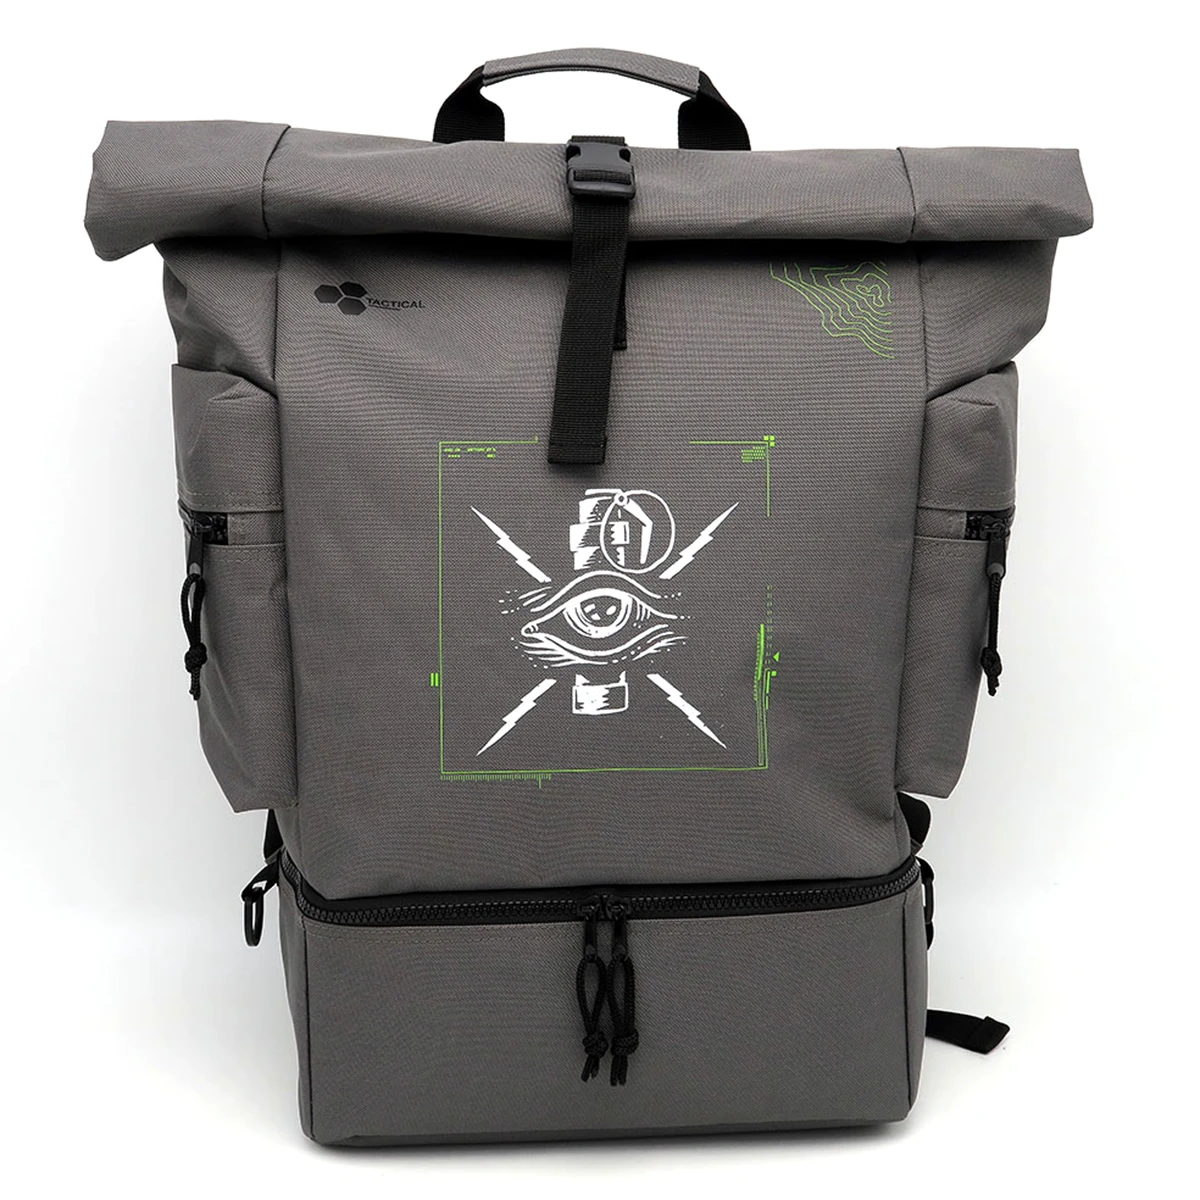 Call of Duty Rolltop Backpack "Blind" Grey Thumbnail 1